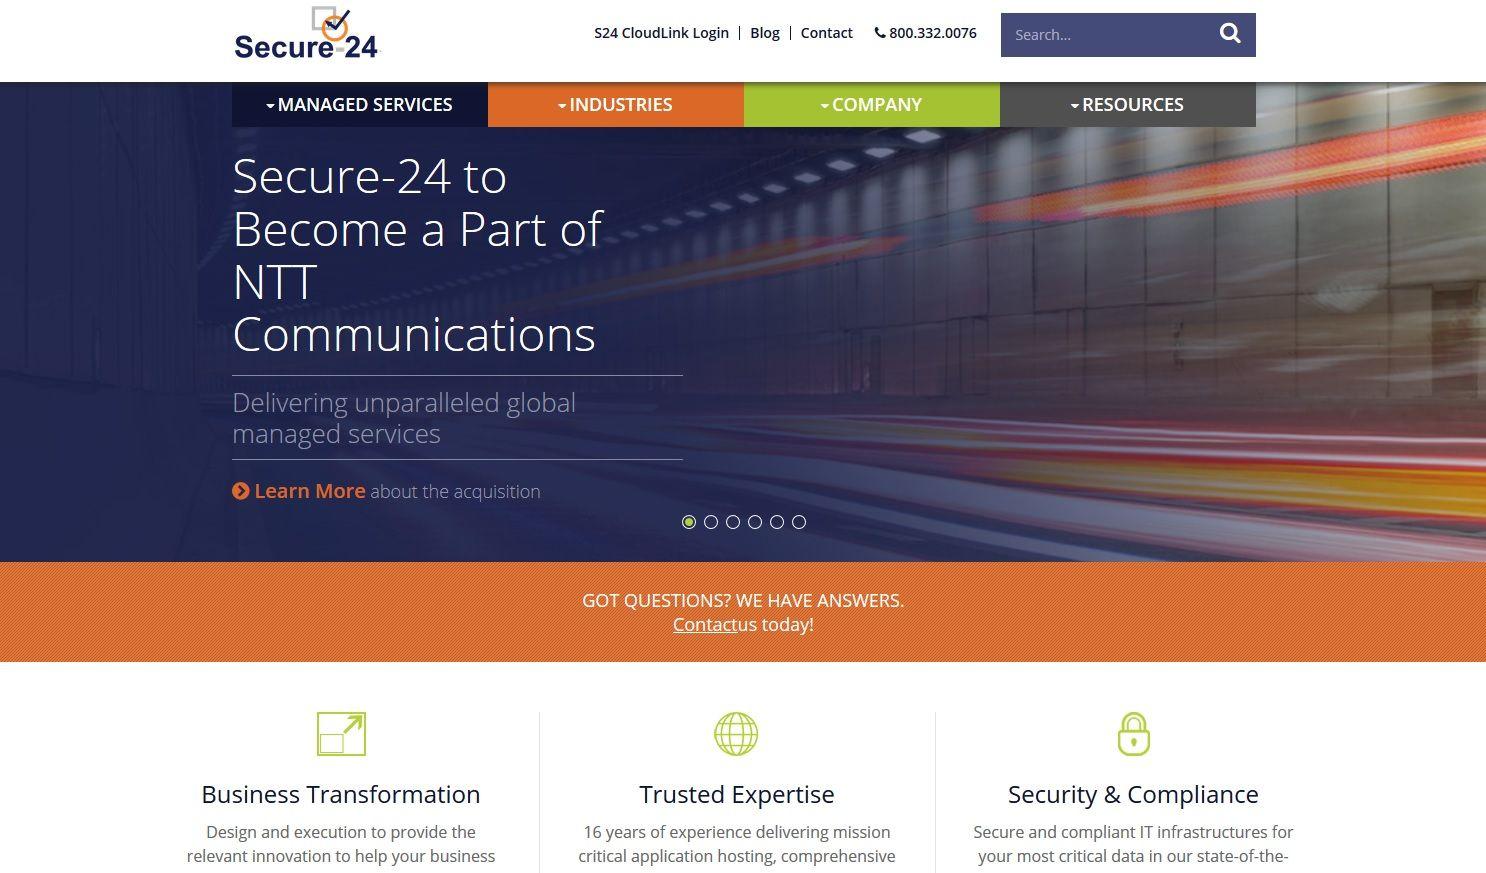 Secure-24 Logo - Southfield's Secure 24 Bought Out By Japanese Firm